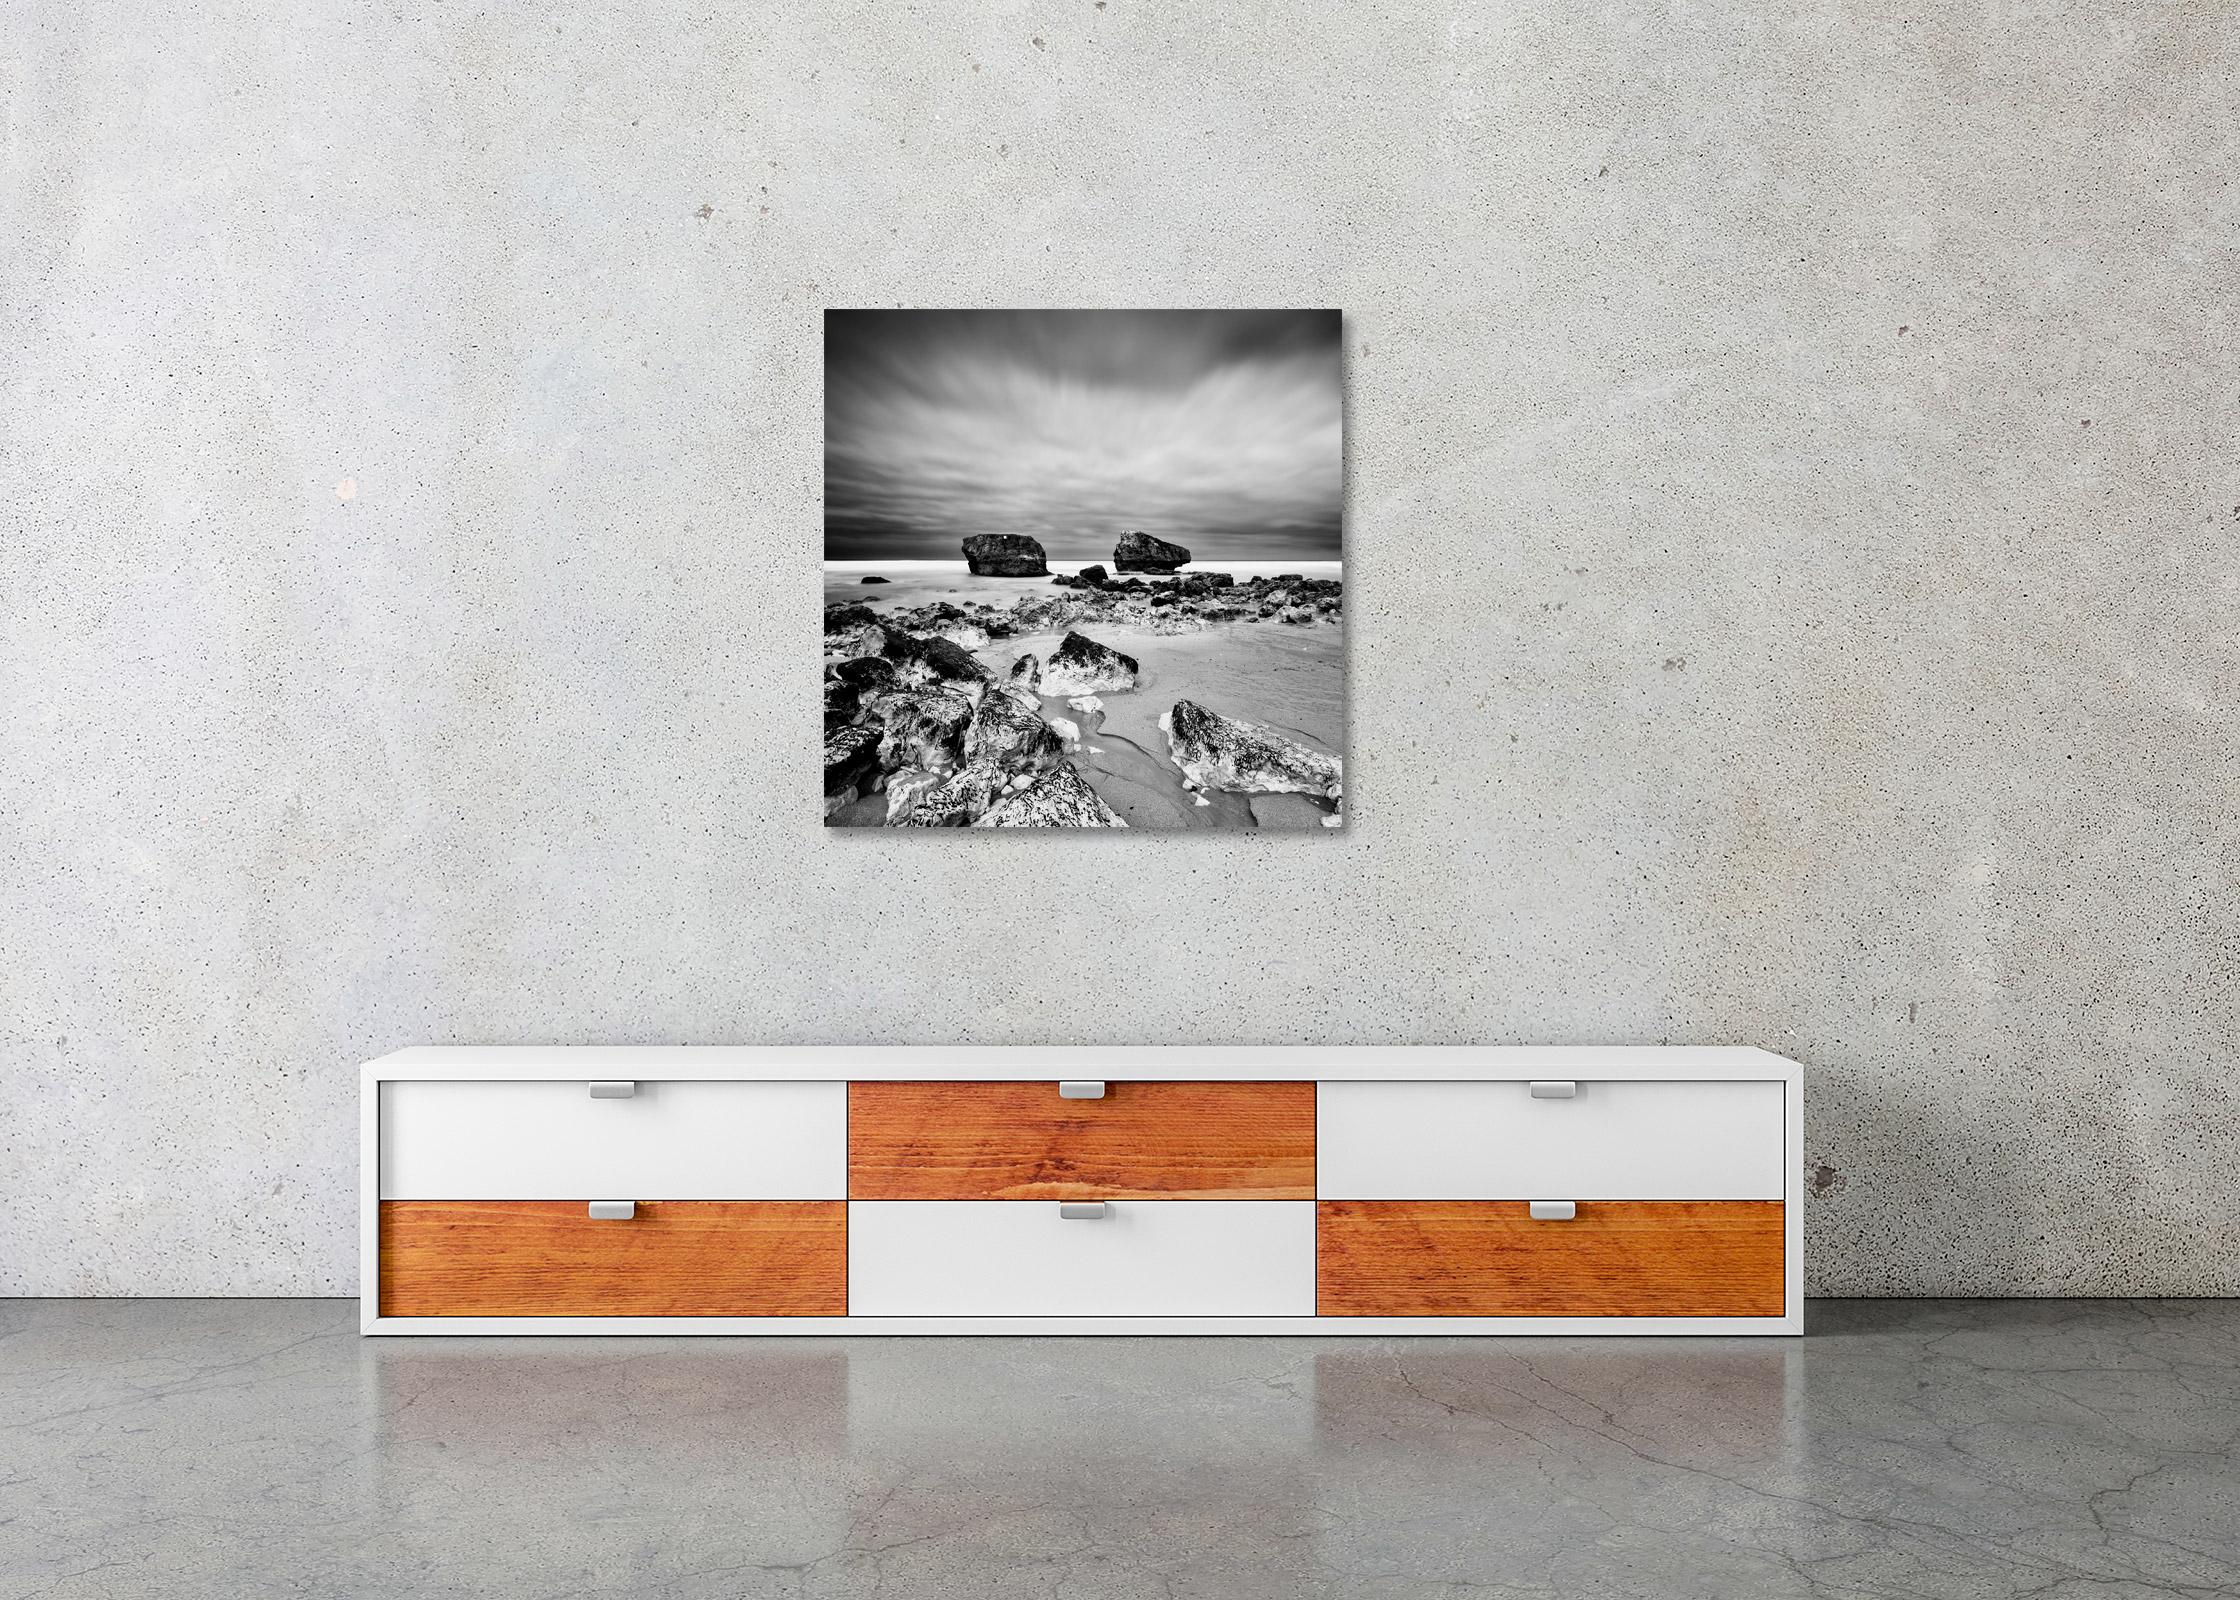 Point de vue, rocky beach, stormy, France, black and white landscape photography For Sale 3